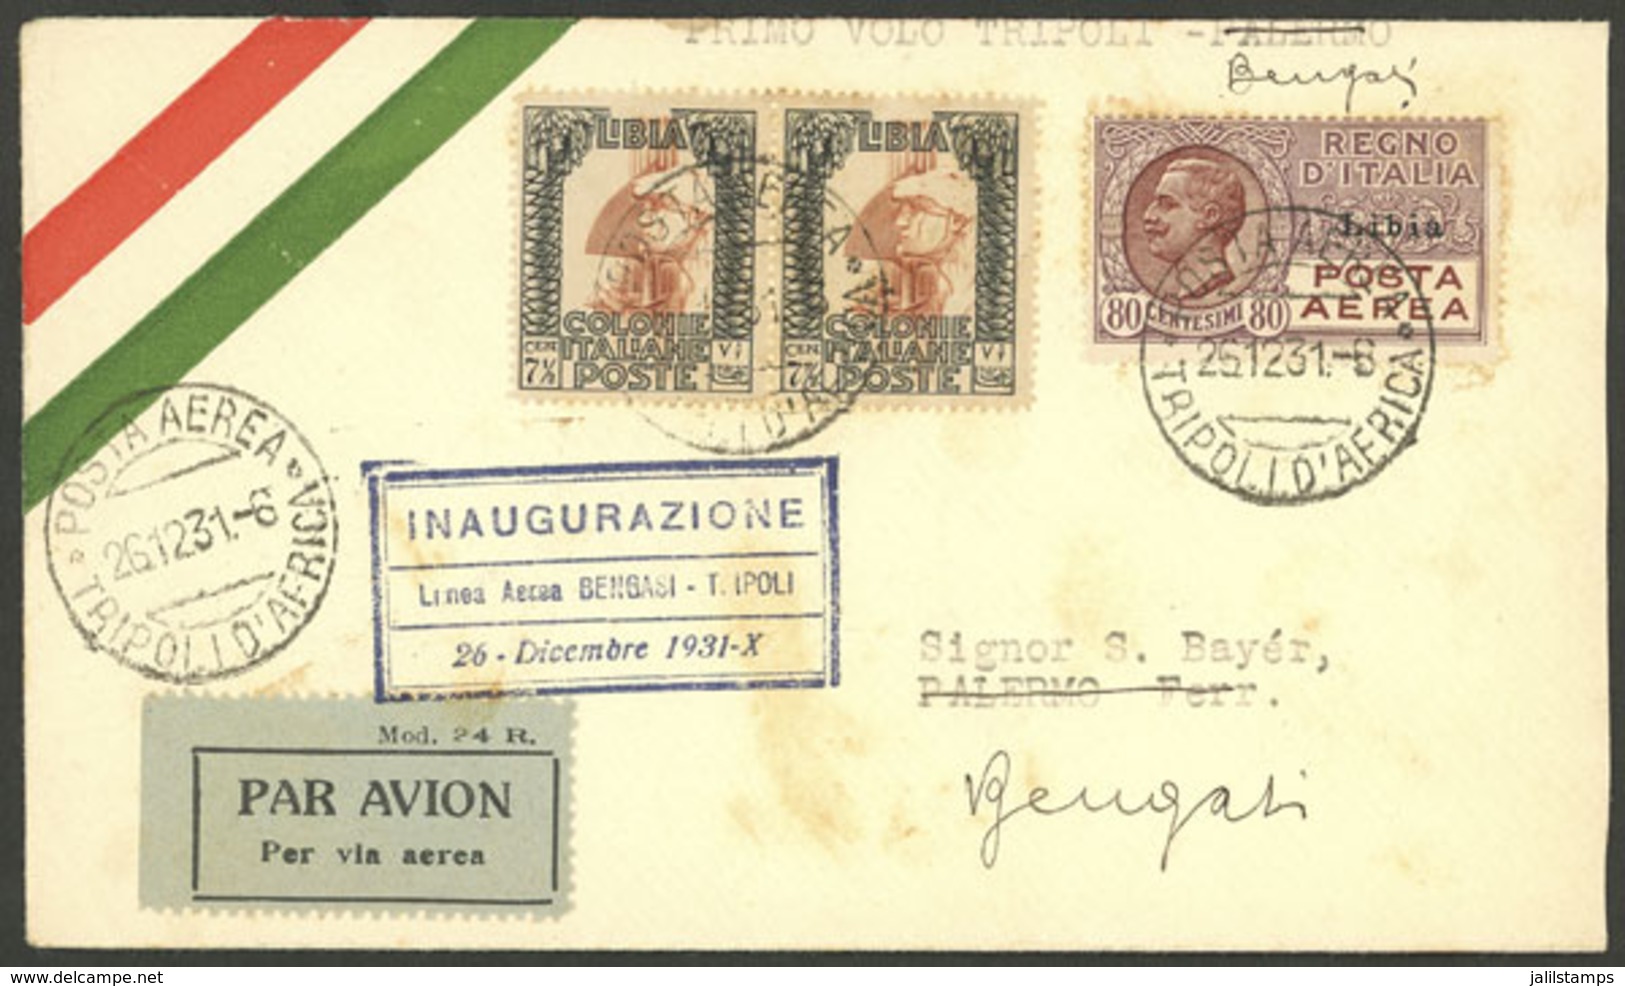 LIBYA: 26/DE/1931 Tripoli - Bengasi, First Flight, Cover Franked By Sc.C2 (US$475 On Cover) + Other Values, With Arrival - Libya